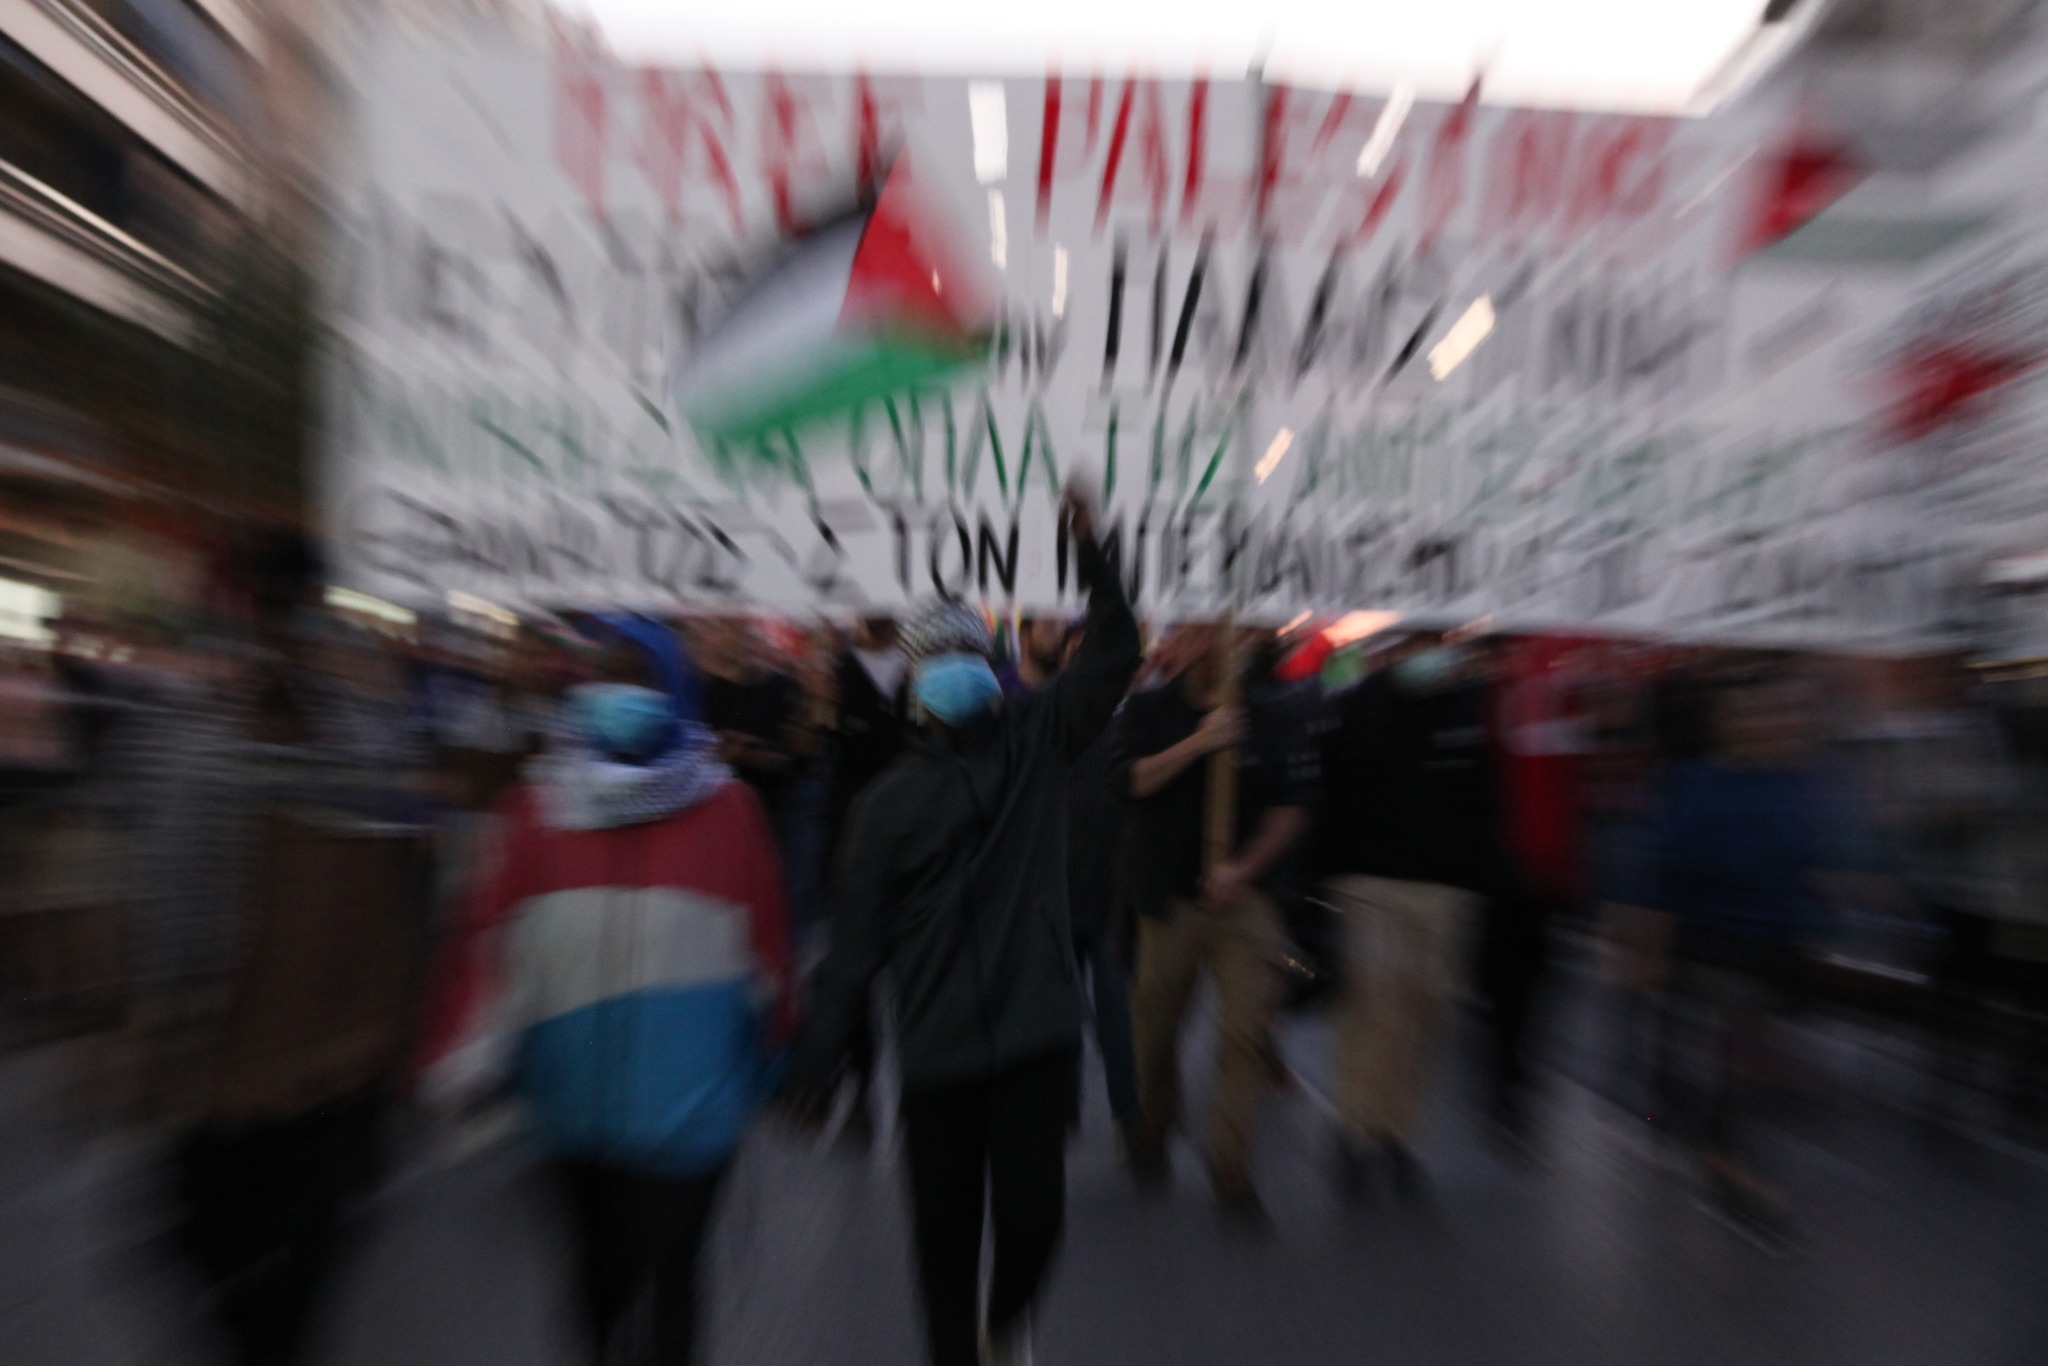 Political-Islam vs. Palestine: From Ambiguity to Clarity